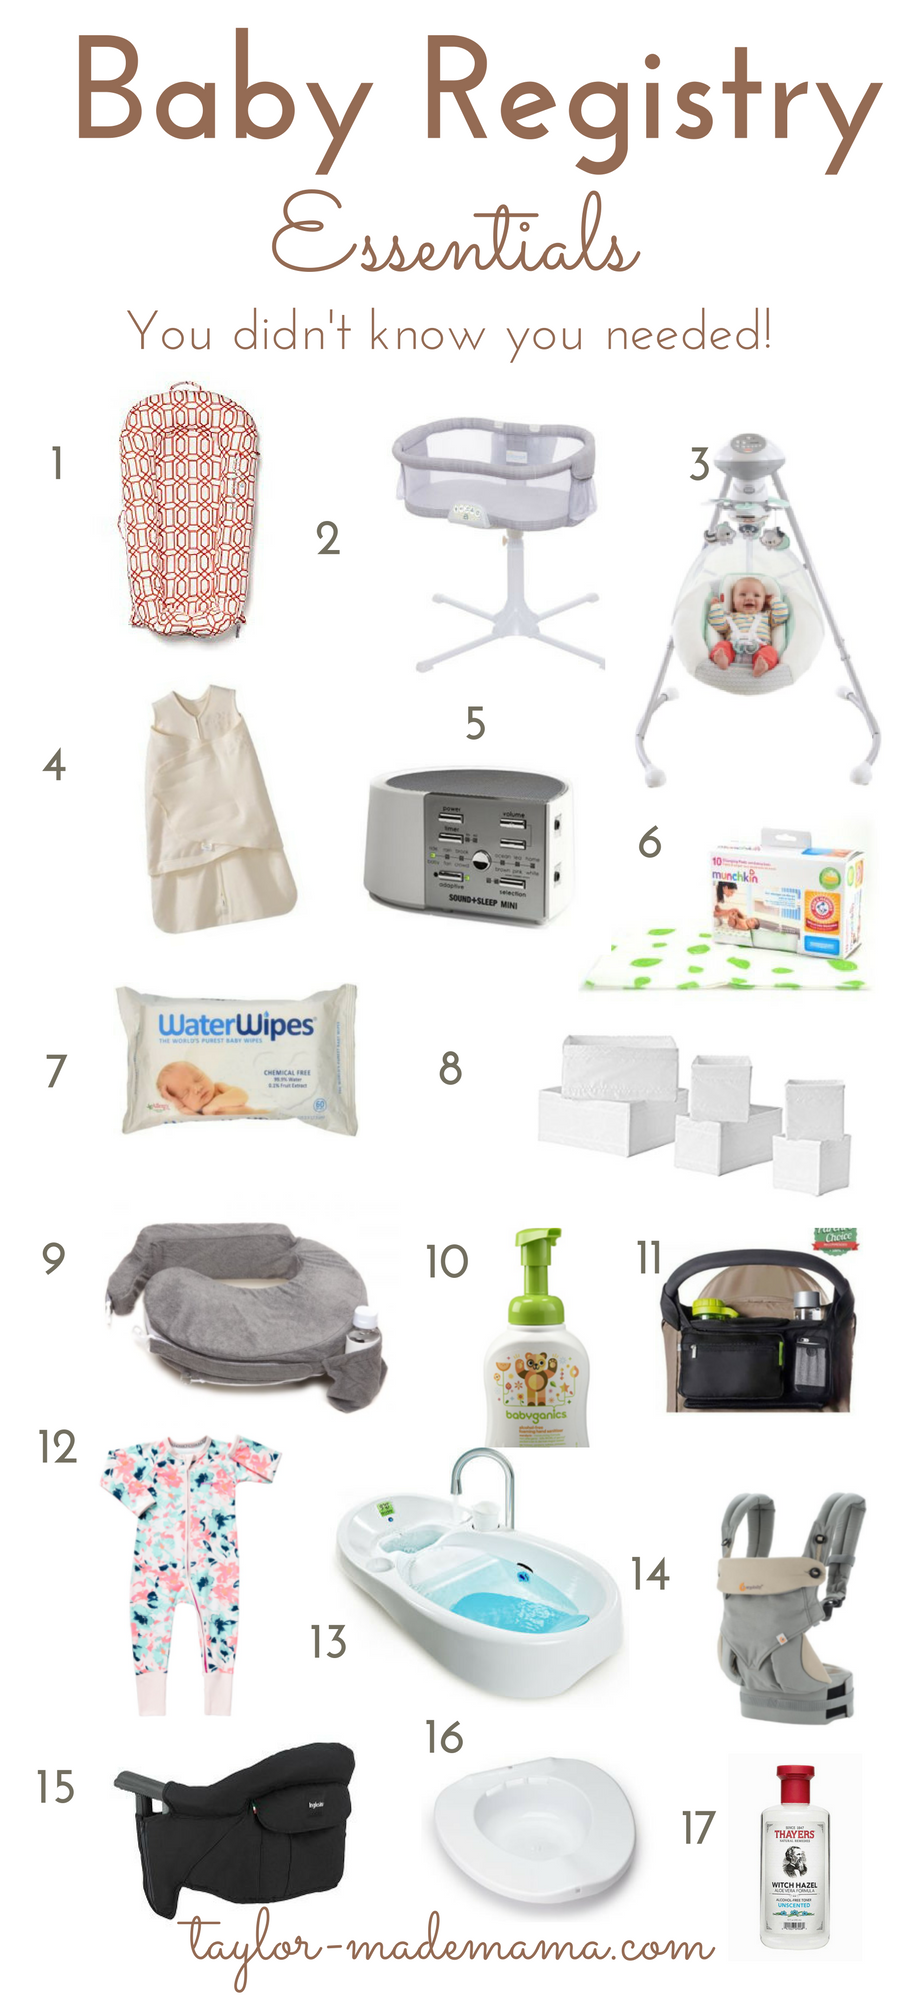 Used Baby Items: What's OK to Use and What's Not